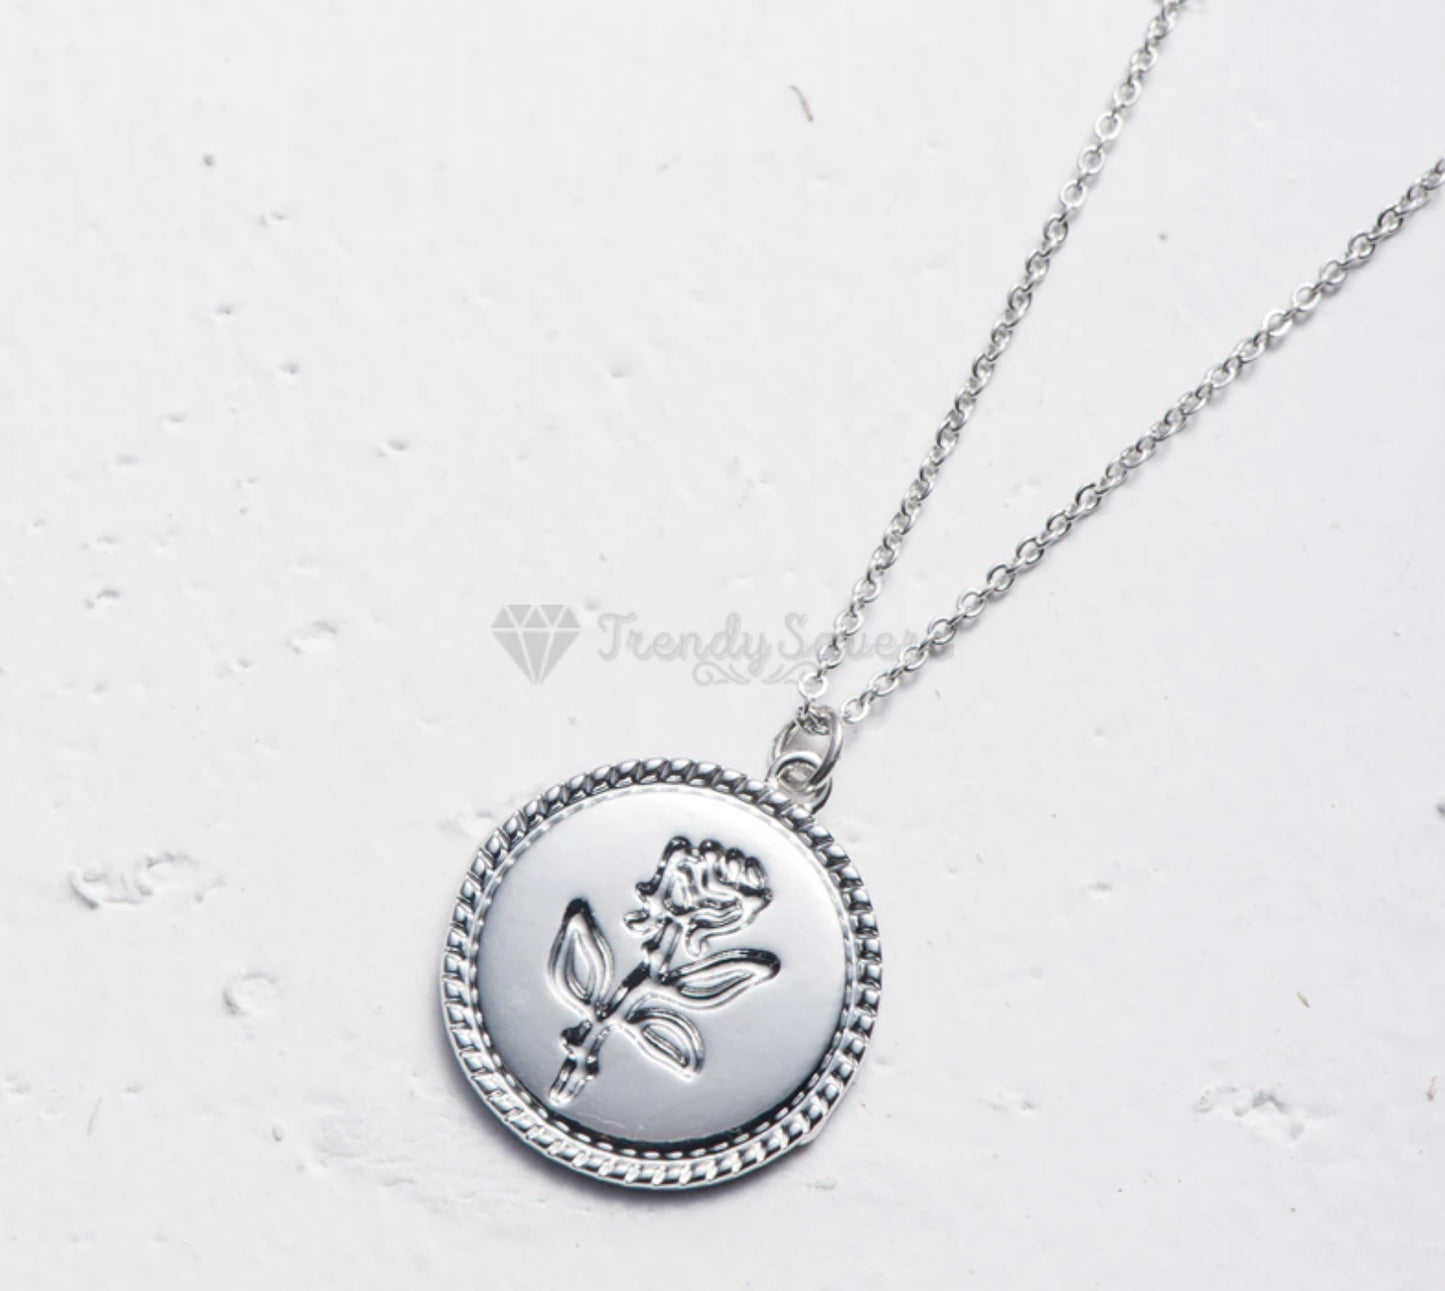 14ct White Gold Plated Flower Engraved Disc Round Coin Pendant Silver Necklace